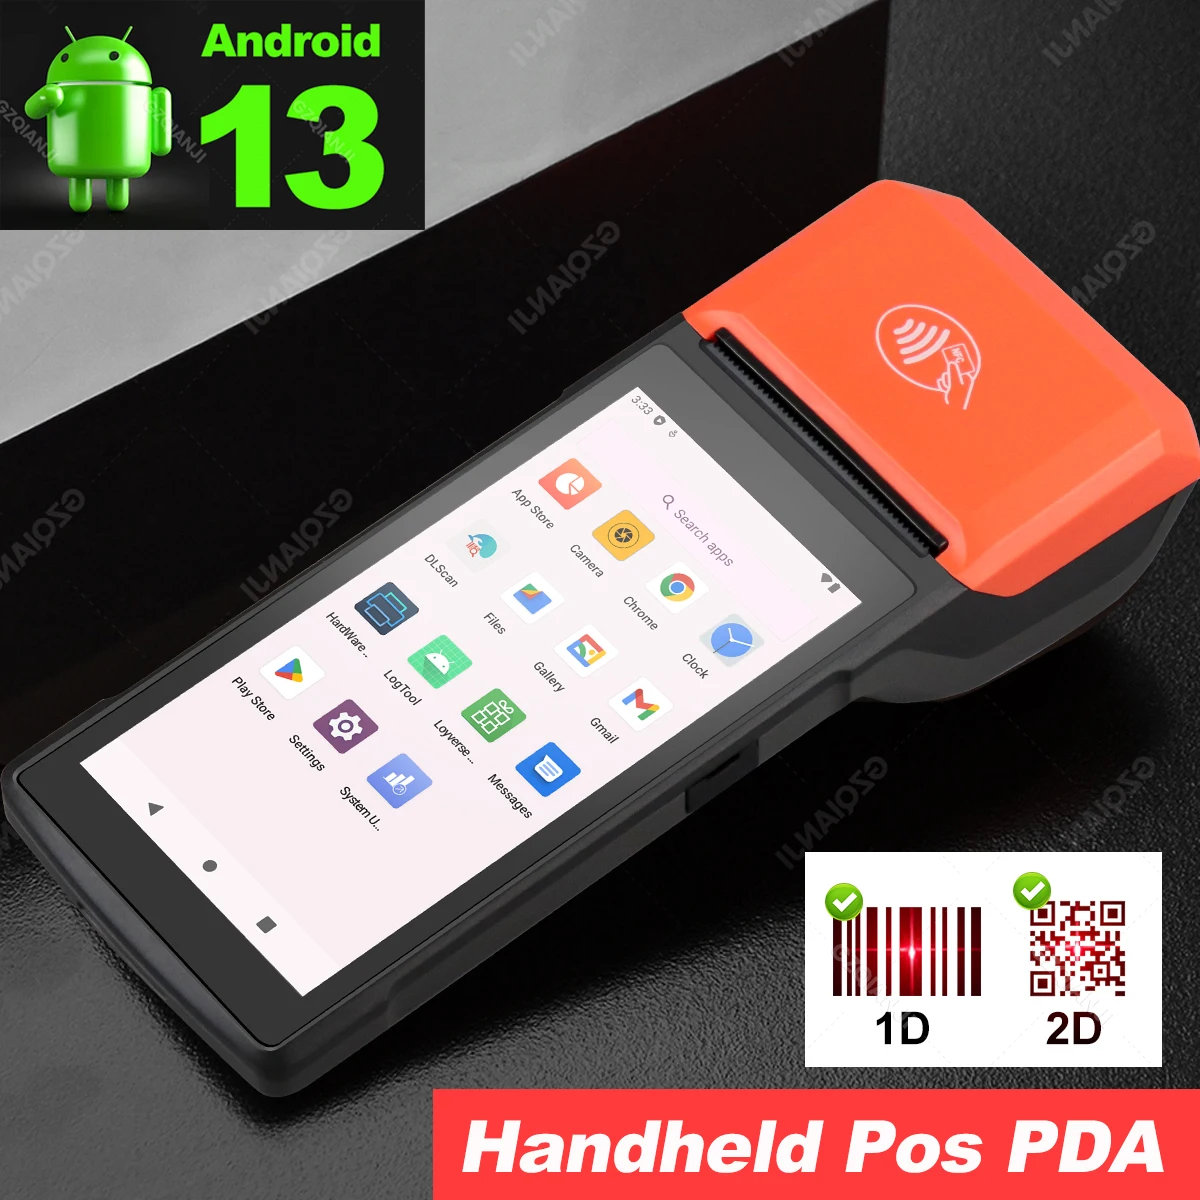 

Upgraded Android 13 Handheld Pos PDA with NFC 1D 2D Barcode Scanner Reader Terminal Bulit-in 58mm Receipt Printer 4G WIFI USB